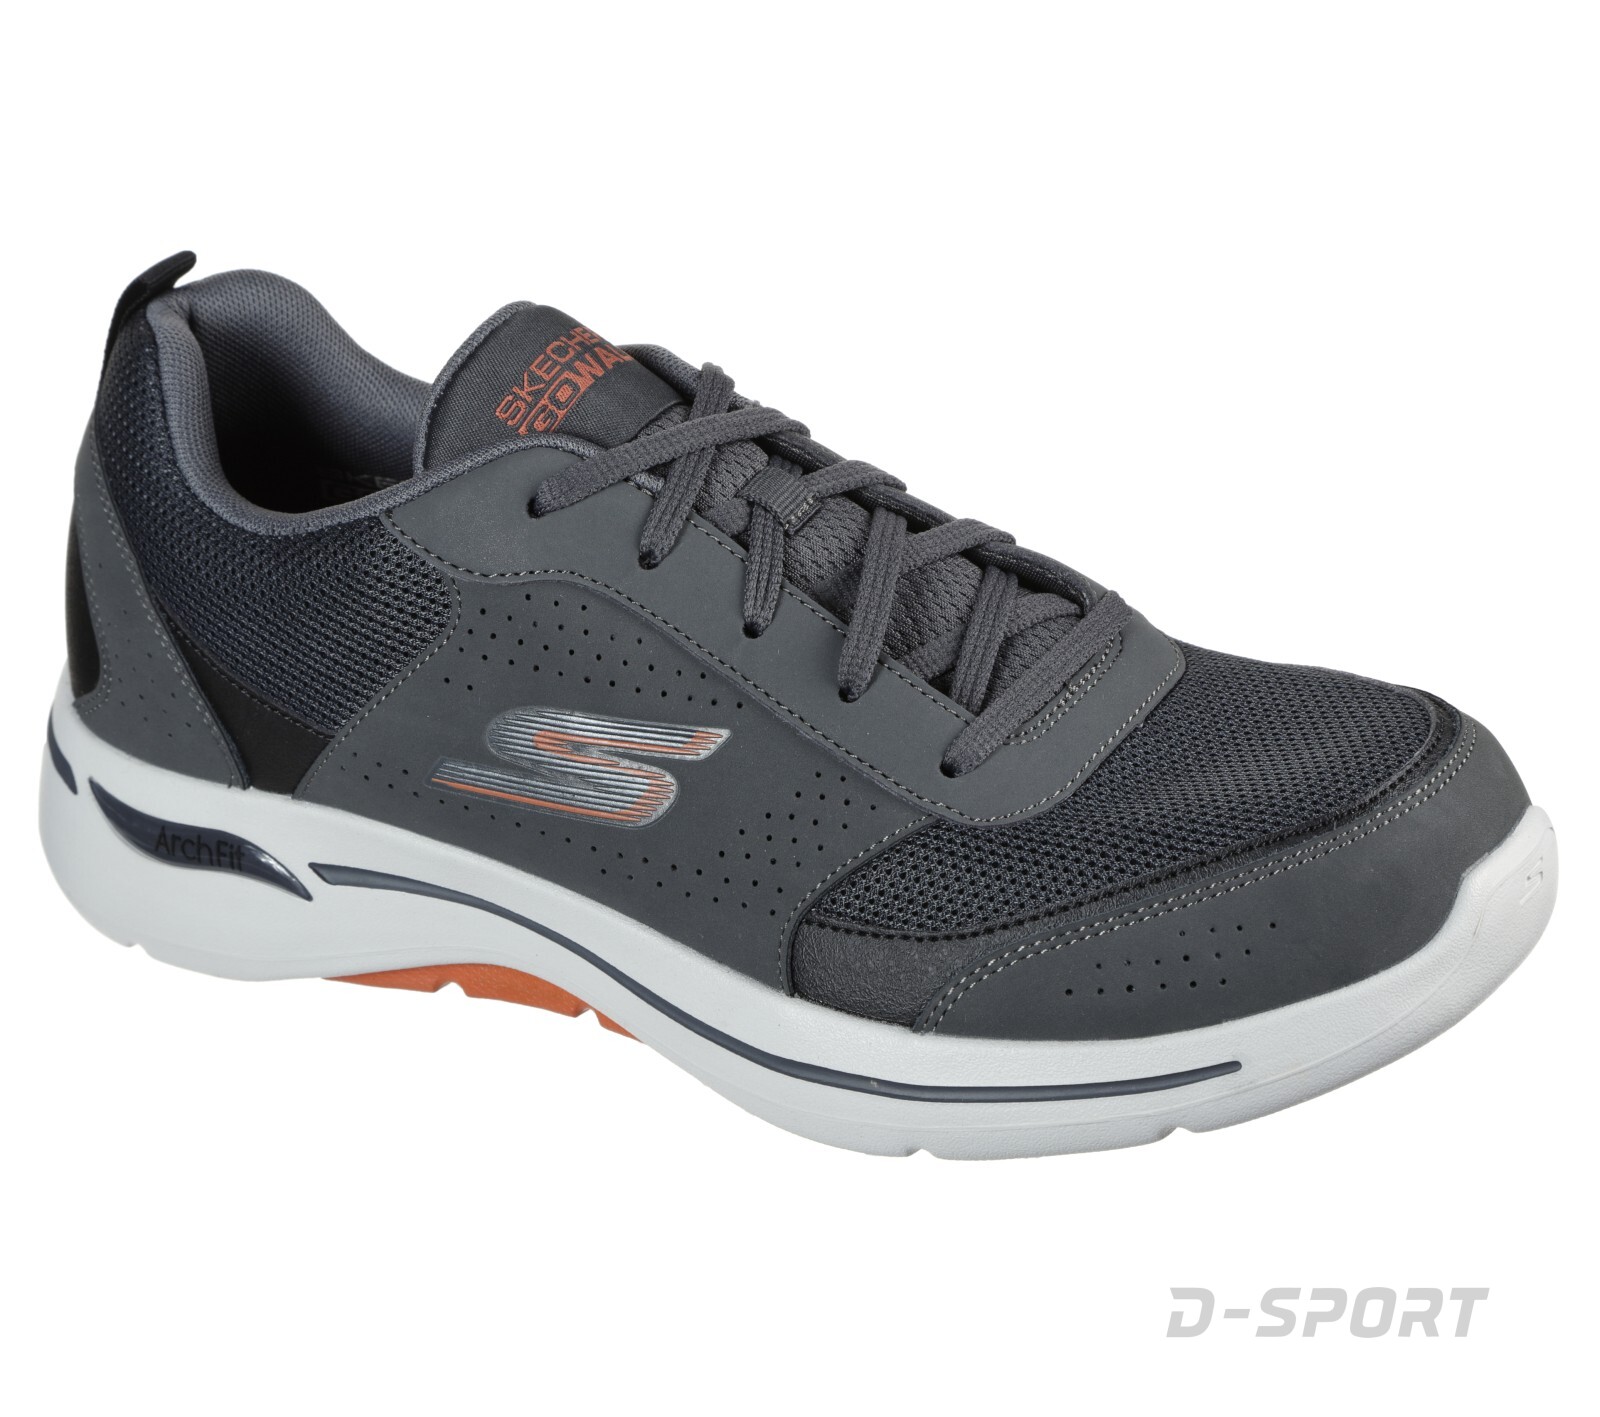 SKECHERS GO WALK ARCH FIT - RECHARGE